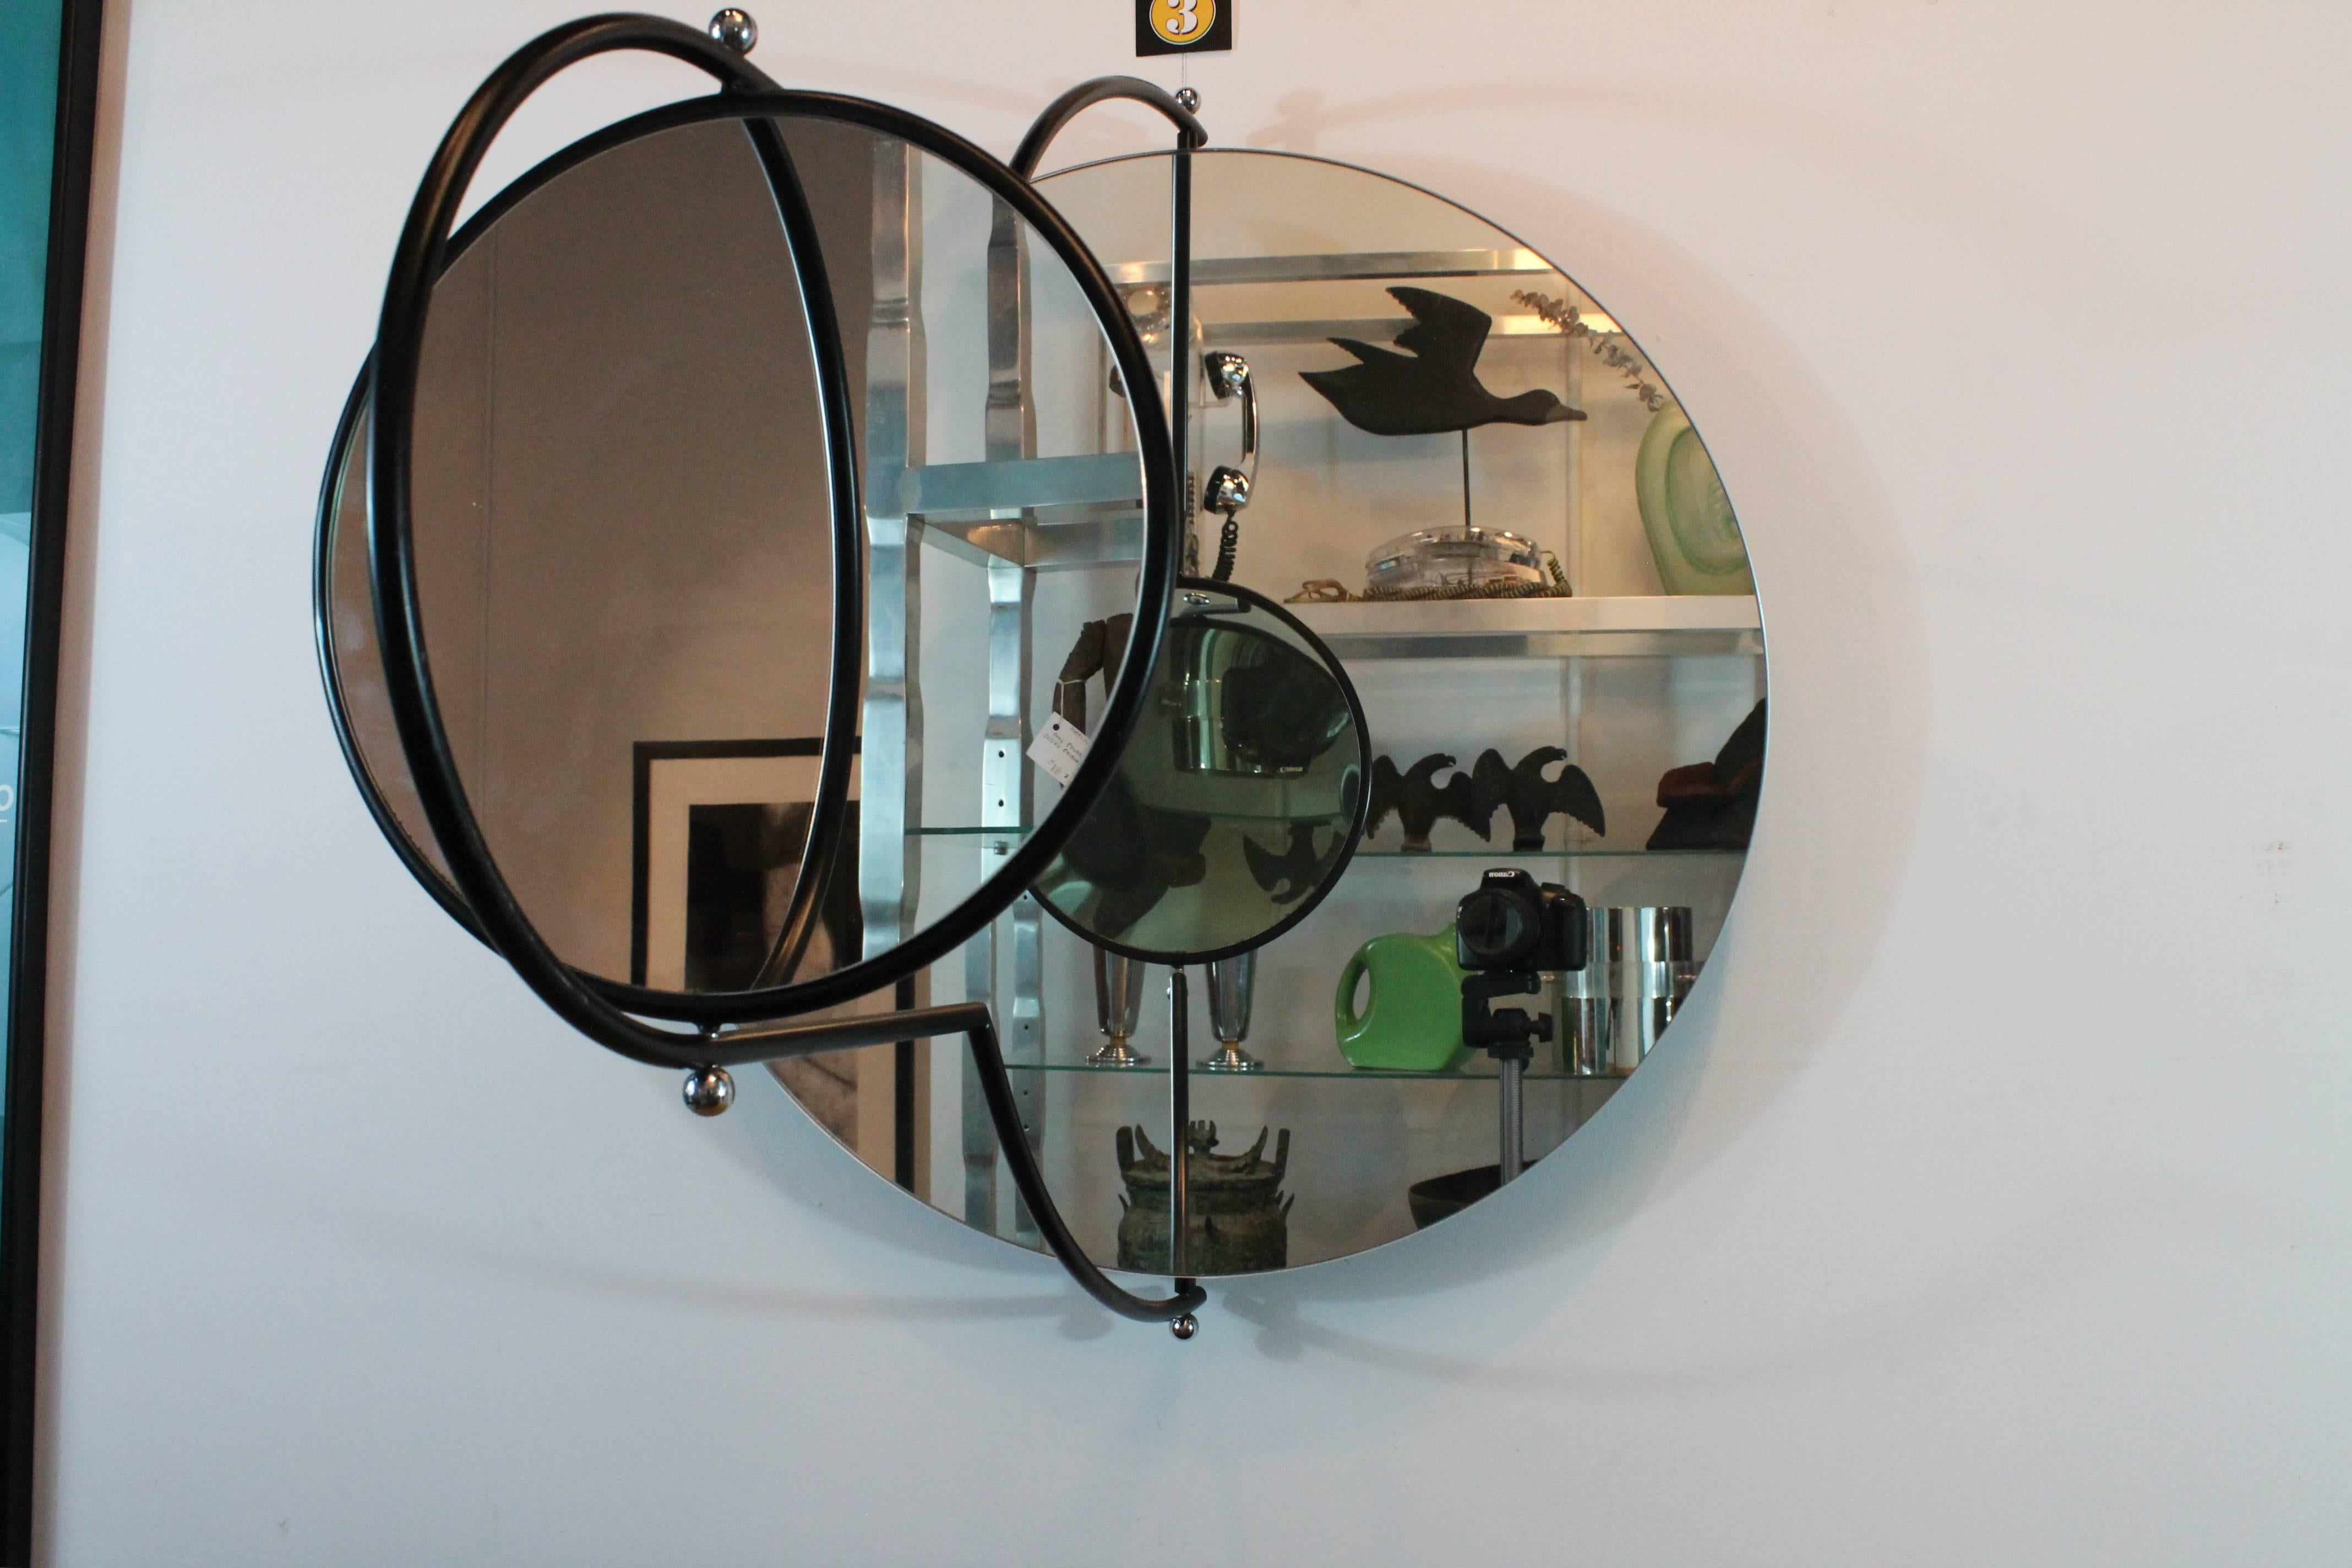 Specchio Due mirror by Rodney Kinsman for Bieffeplast, Padova/ Italy.
The larger mirror is 21.5